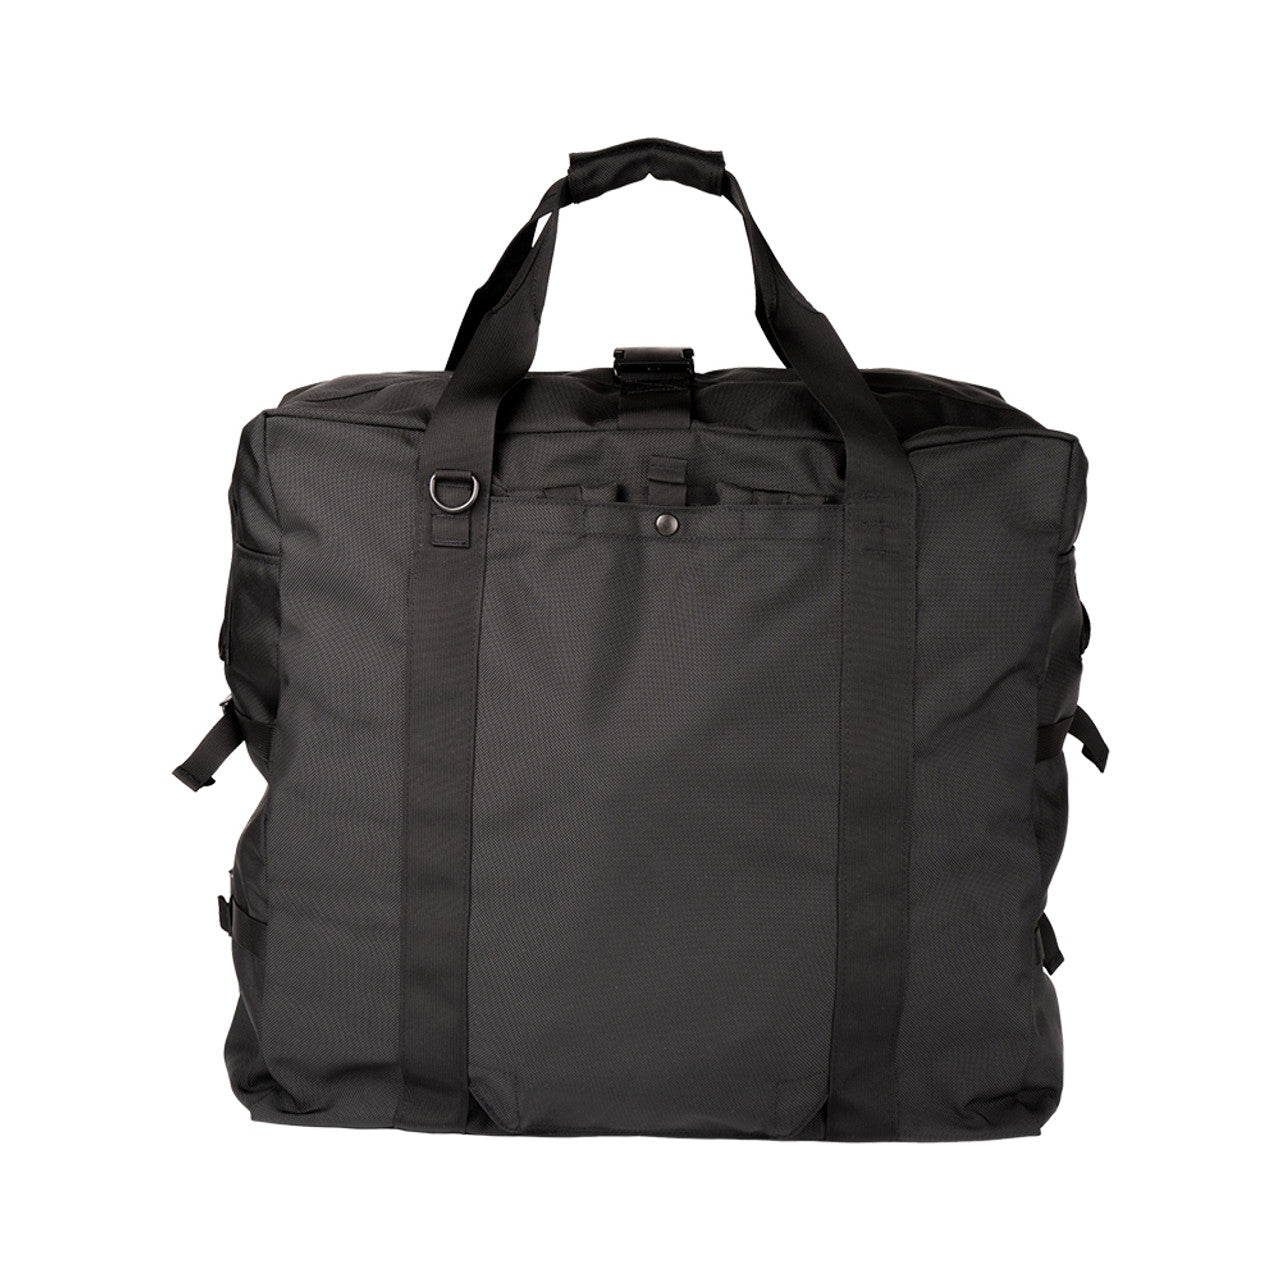 Modified F Aviator Kit Bag - Black : Stowaway Straps Tucked in a Hidden Compartment